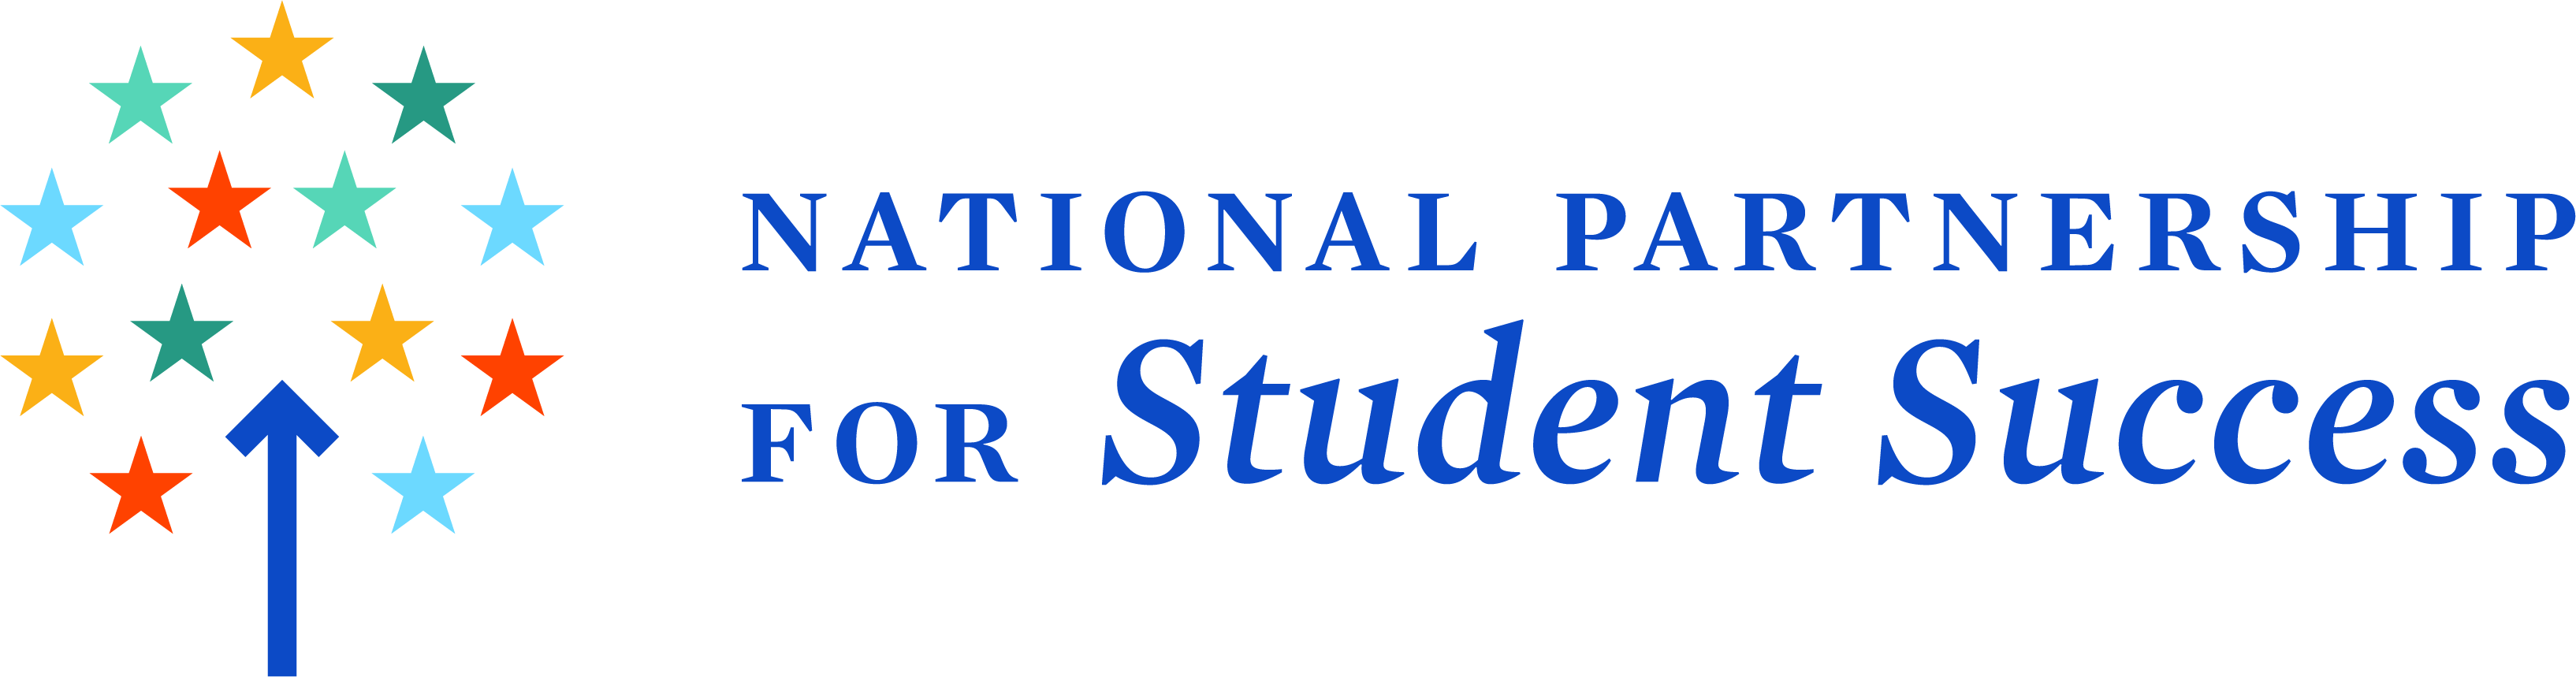 The National Partnership for Student Success